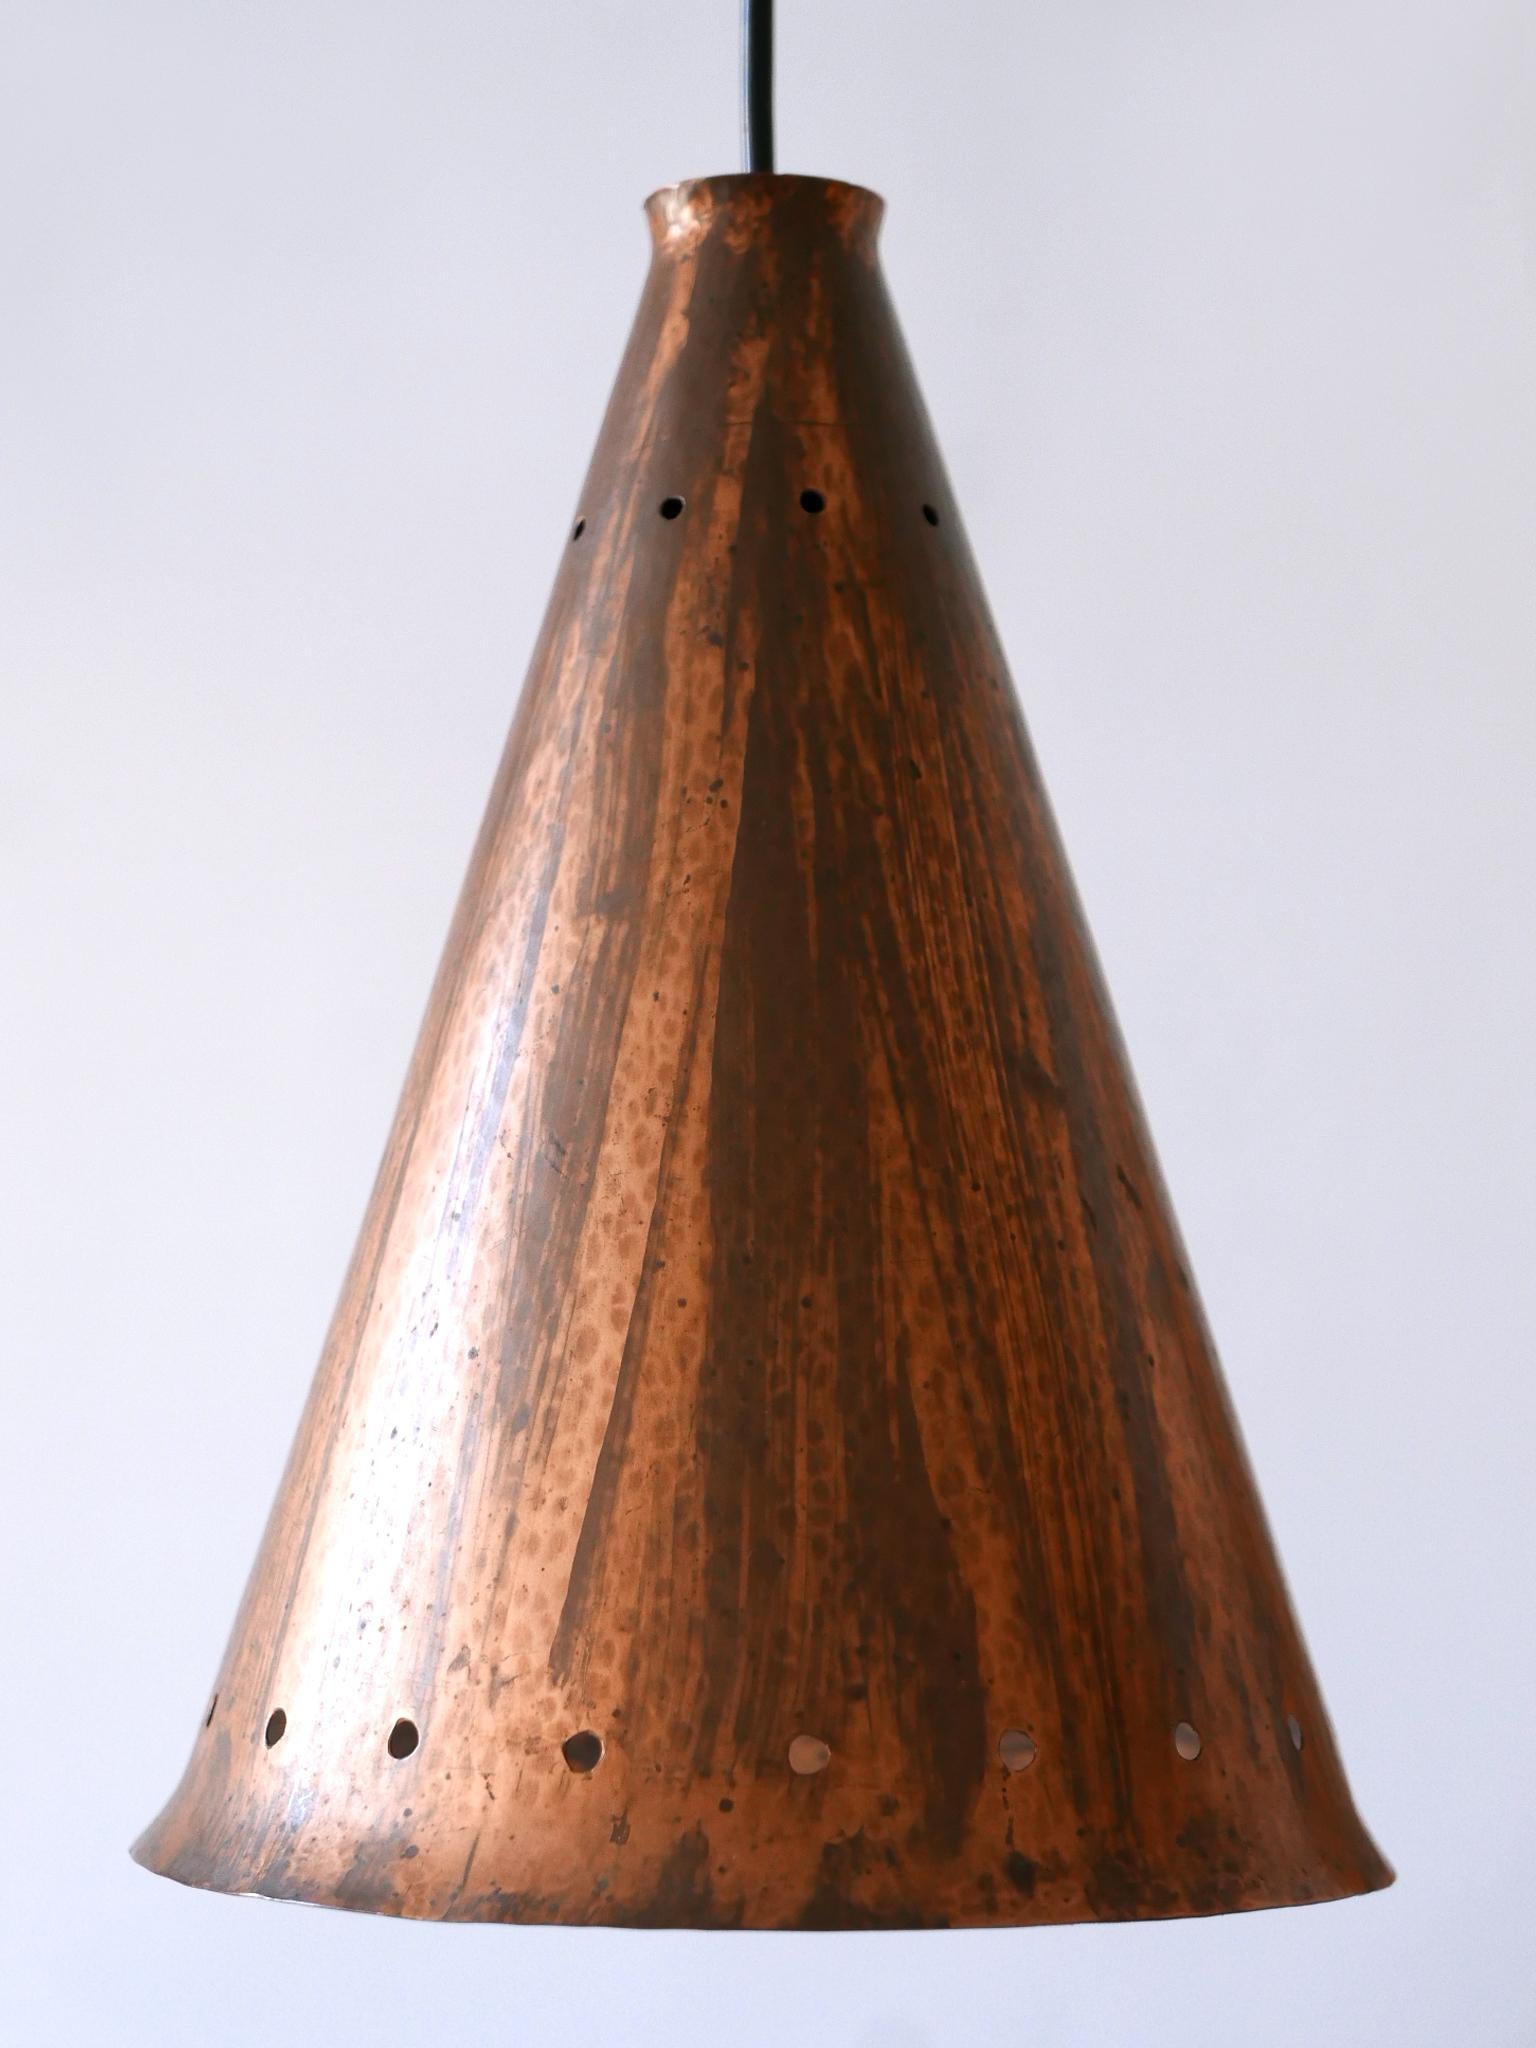 Exceptional & Large Mid-Century Modern Copper Pendant Lamp Scandinavia, 1950s For Sale 11